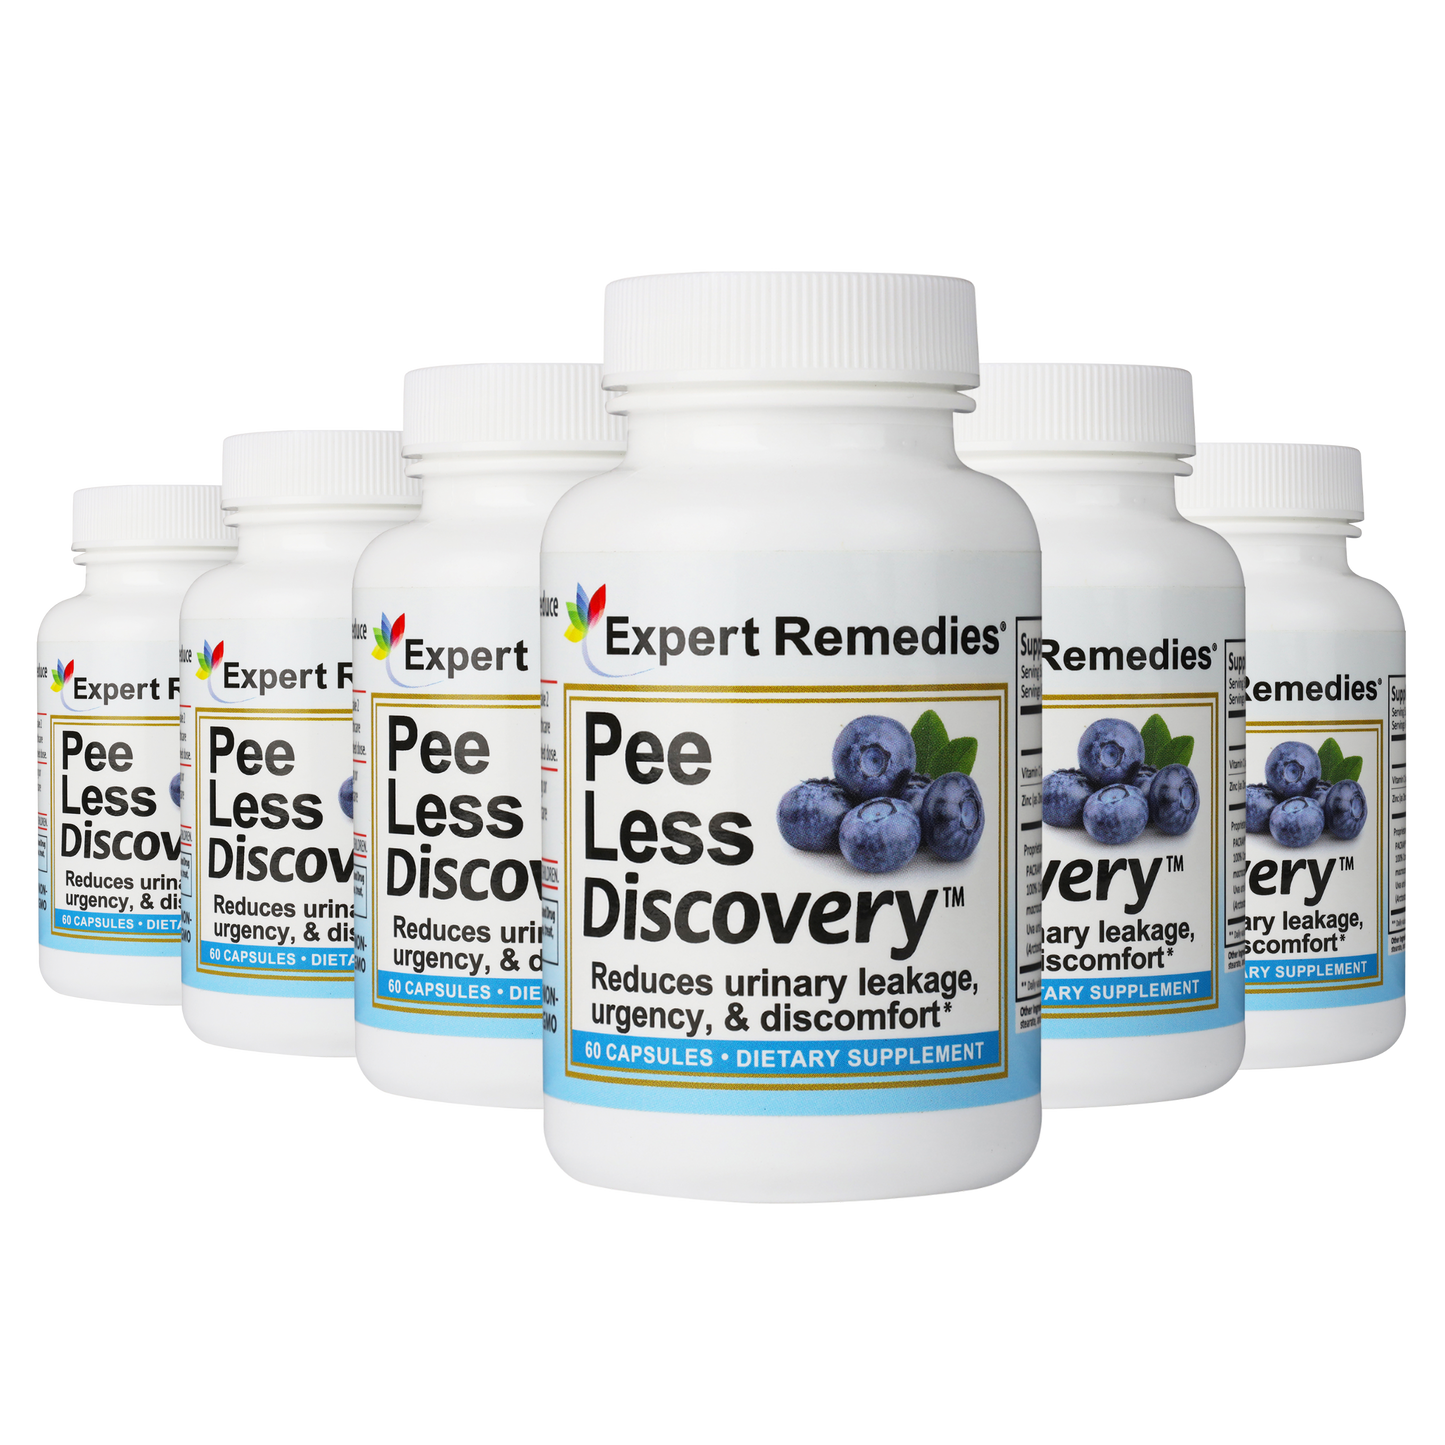 Buy 6 Bottles of Pee Less Discovery Now 52% OFF